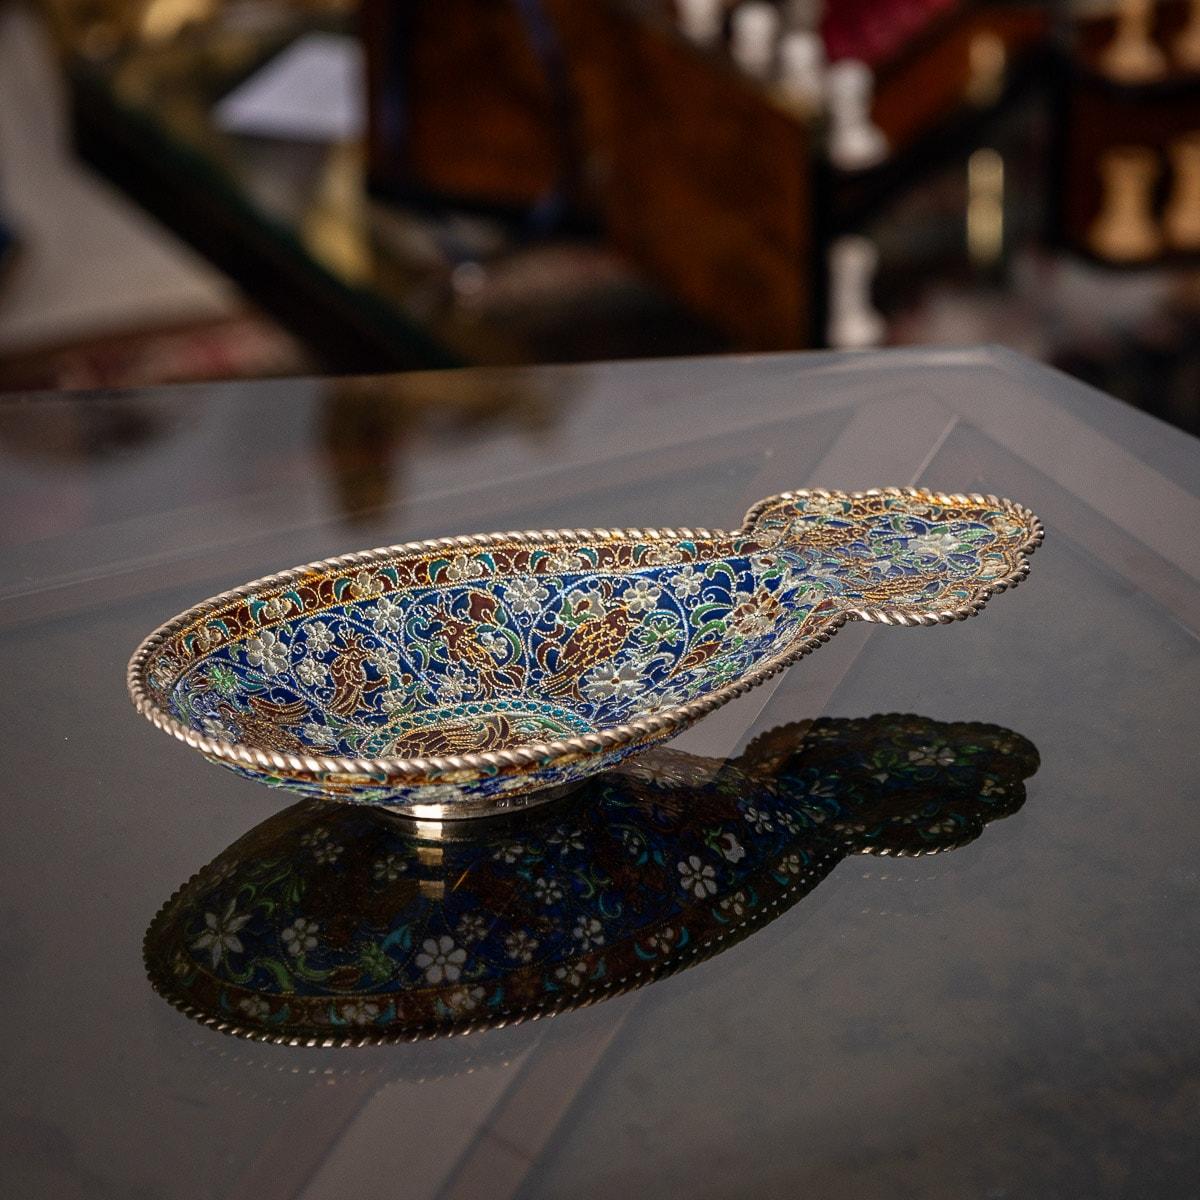 Antique 19th century imperial Russian solid silver-gilt and plique-a-jour enamel kovsh. Oval, with raised shaped trefoil handle, decorated with exotic birds, flowers and floral scrolls in red, blue, pink, green and white within red and twist wire